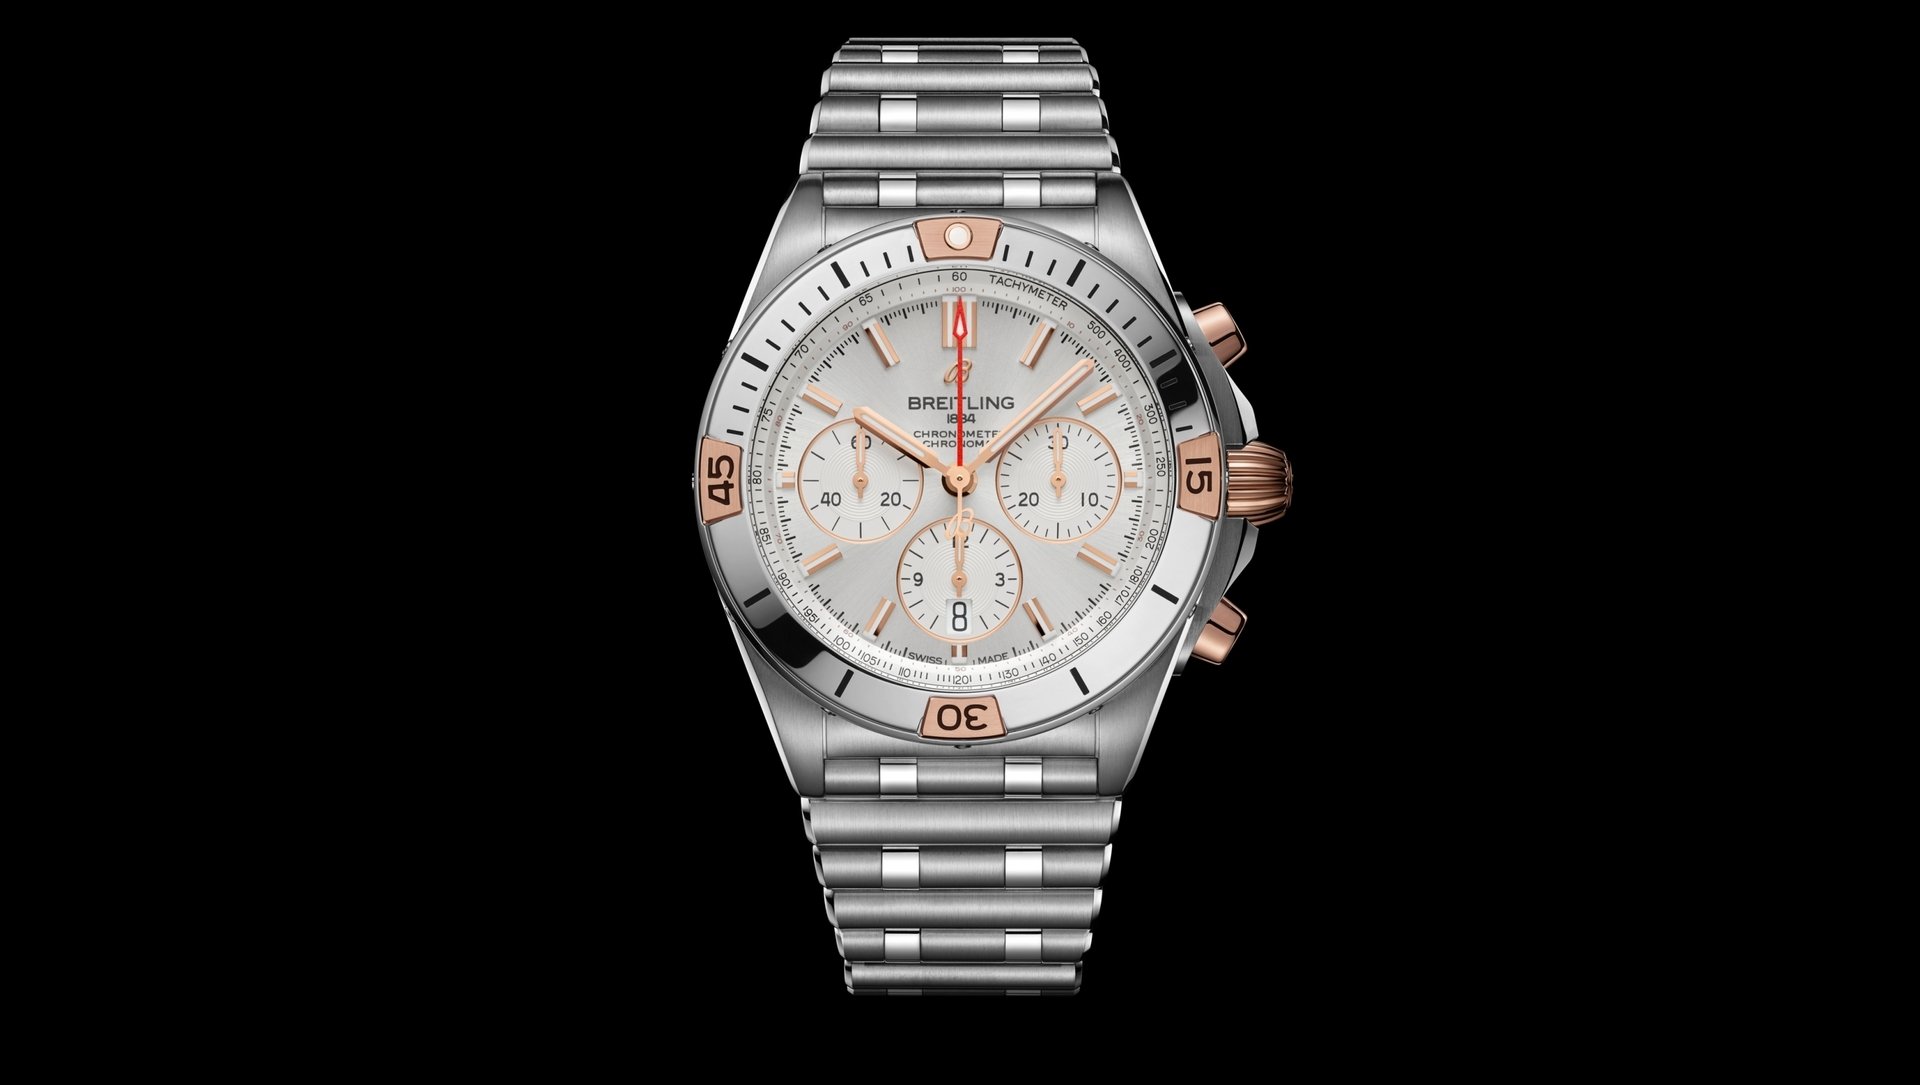 Breitling timers evolve stainless steel chronometer automatic diamondsbreitling timers evolved stainless steel pearl automatic diamonds